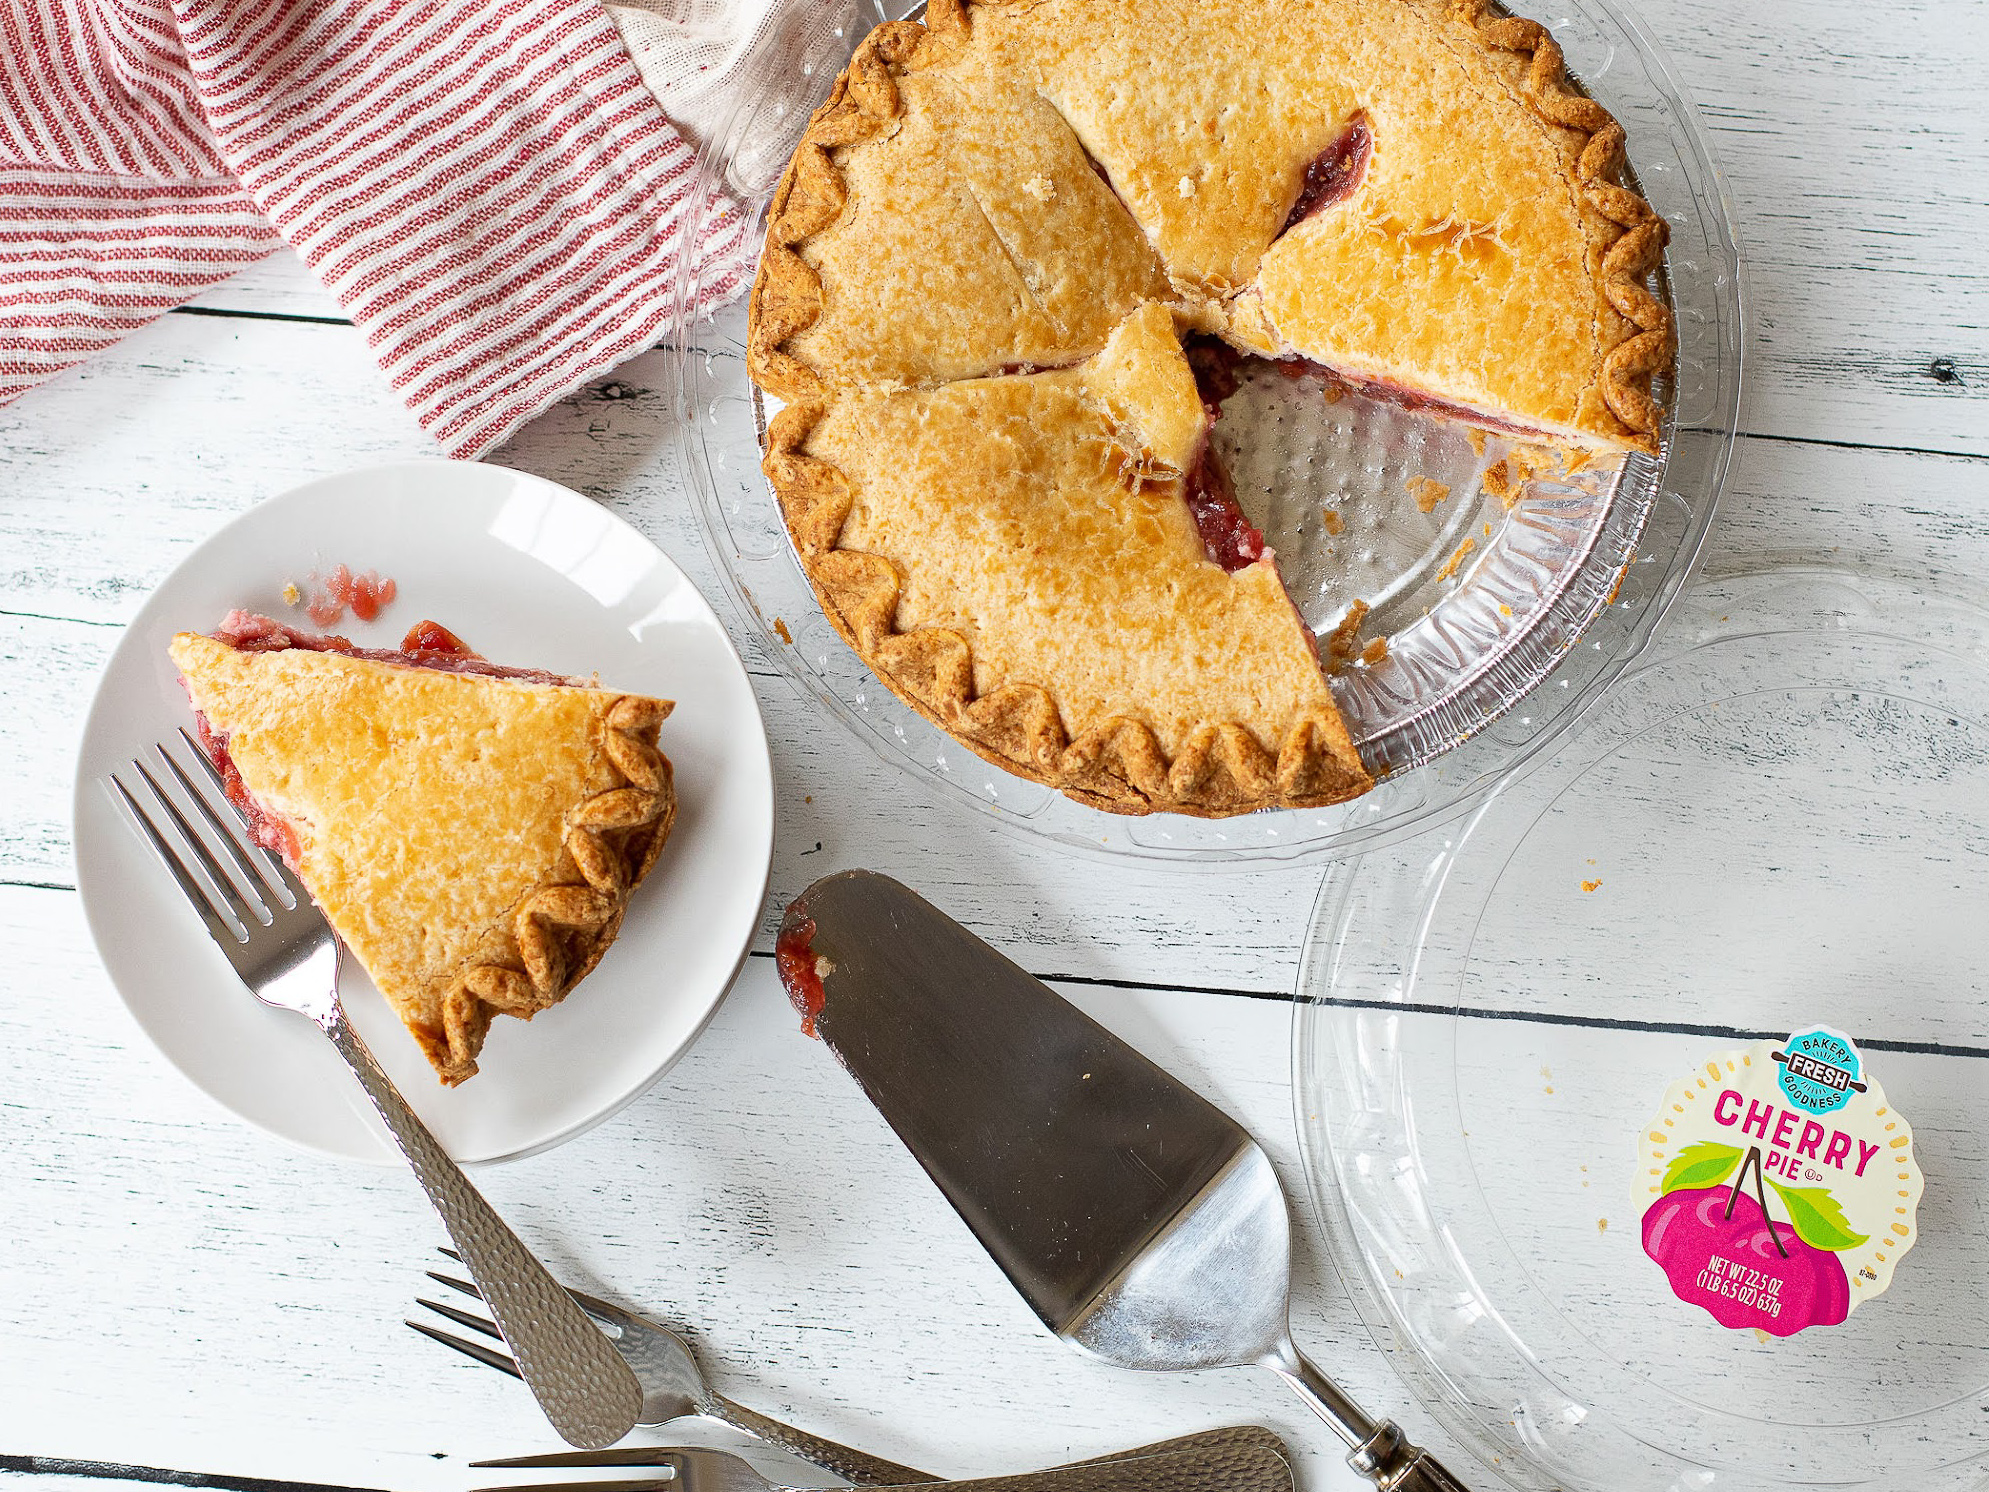 Get Tasty Bakery Pies For Just $3.47 At Kroger